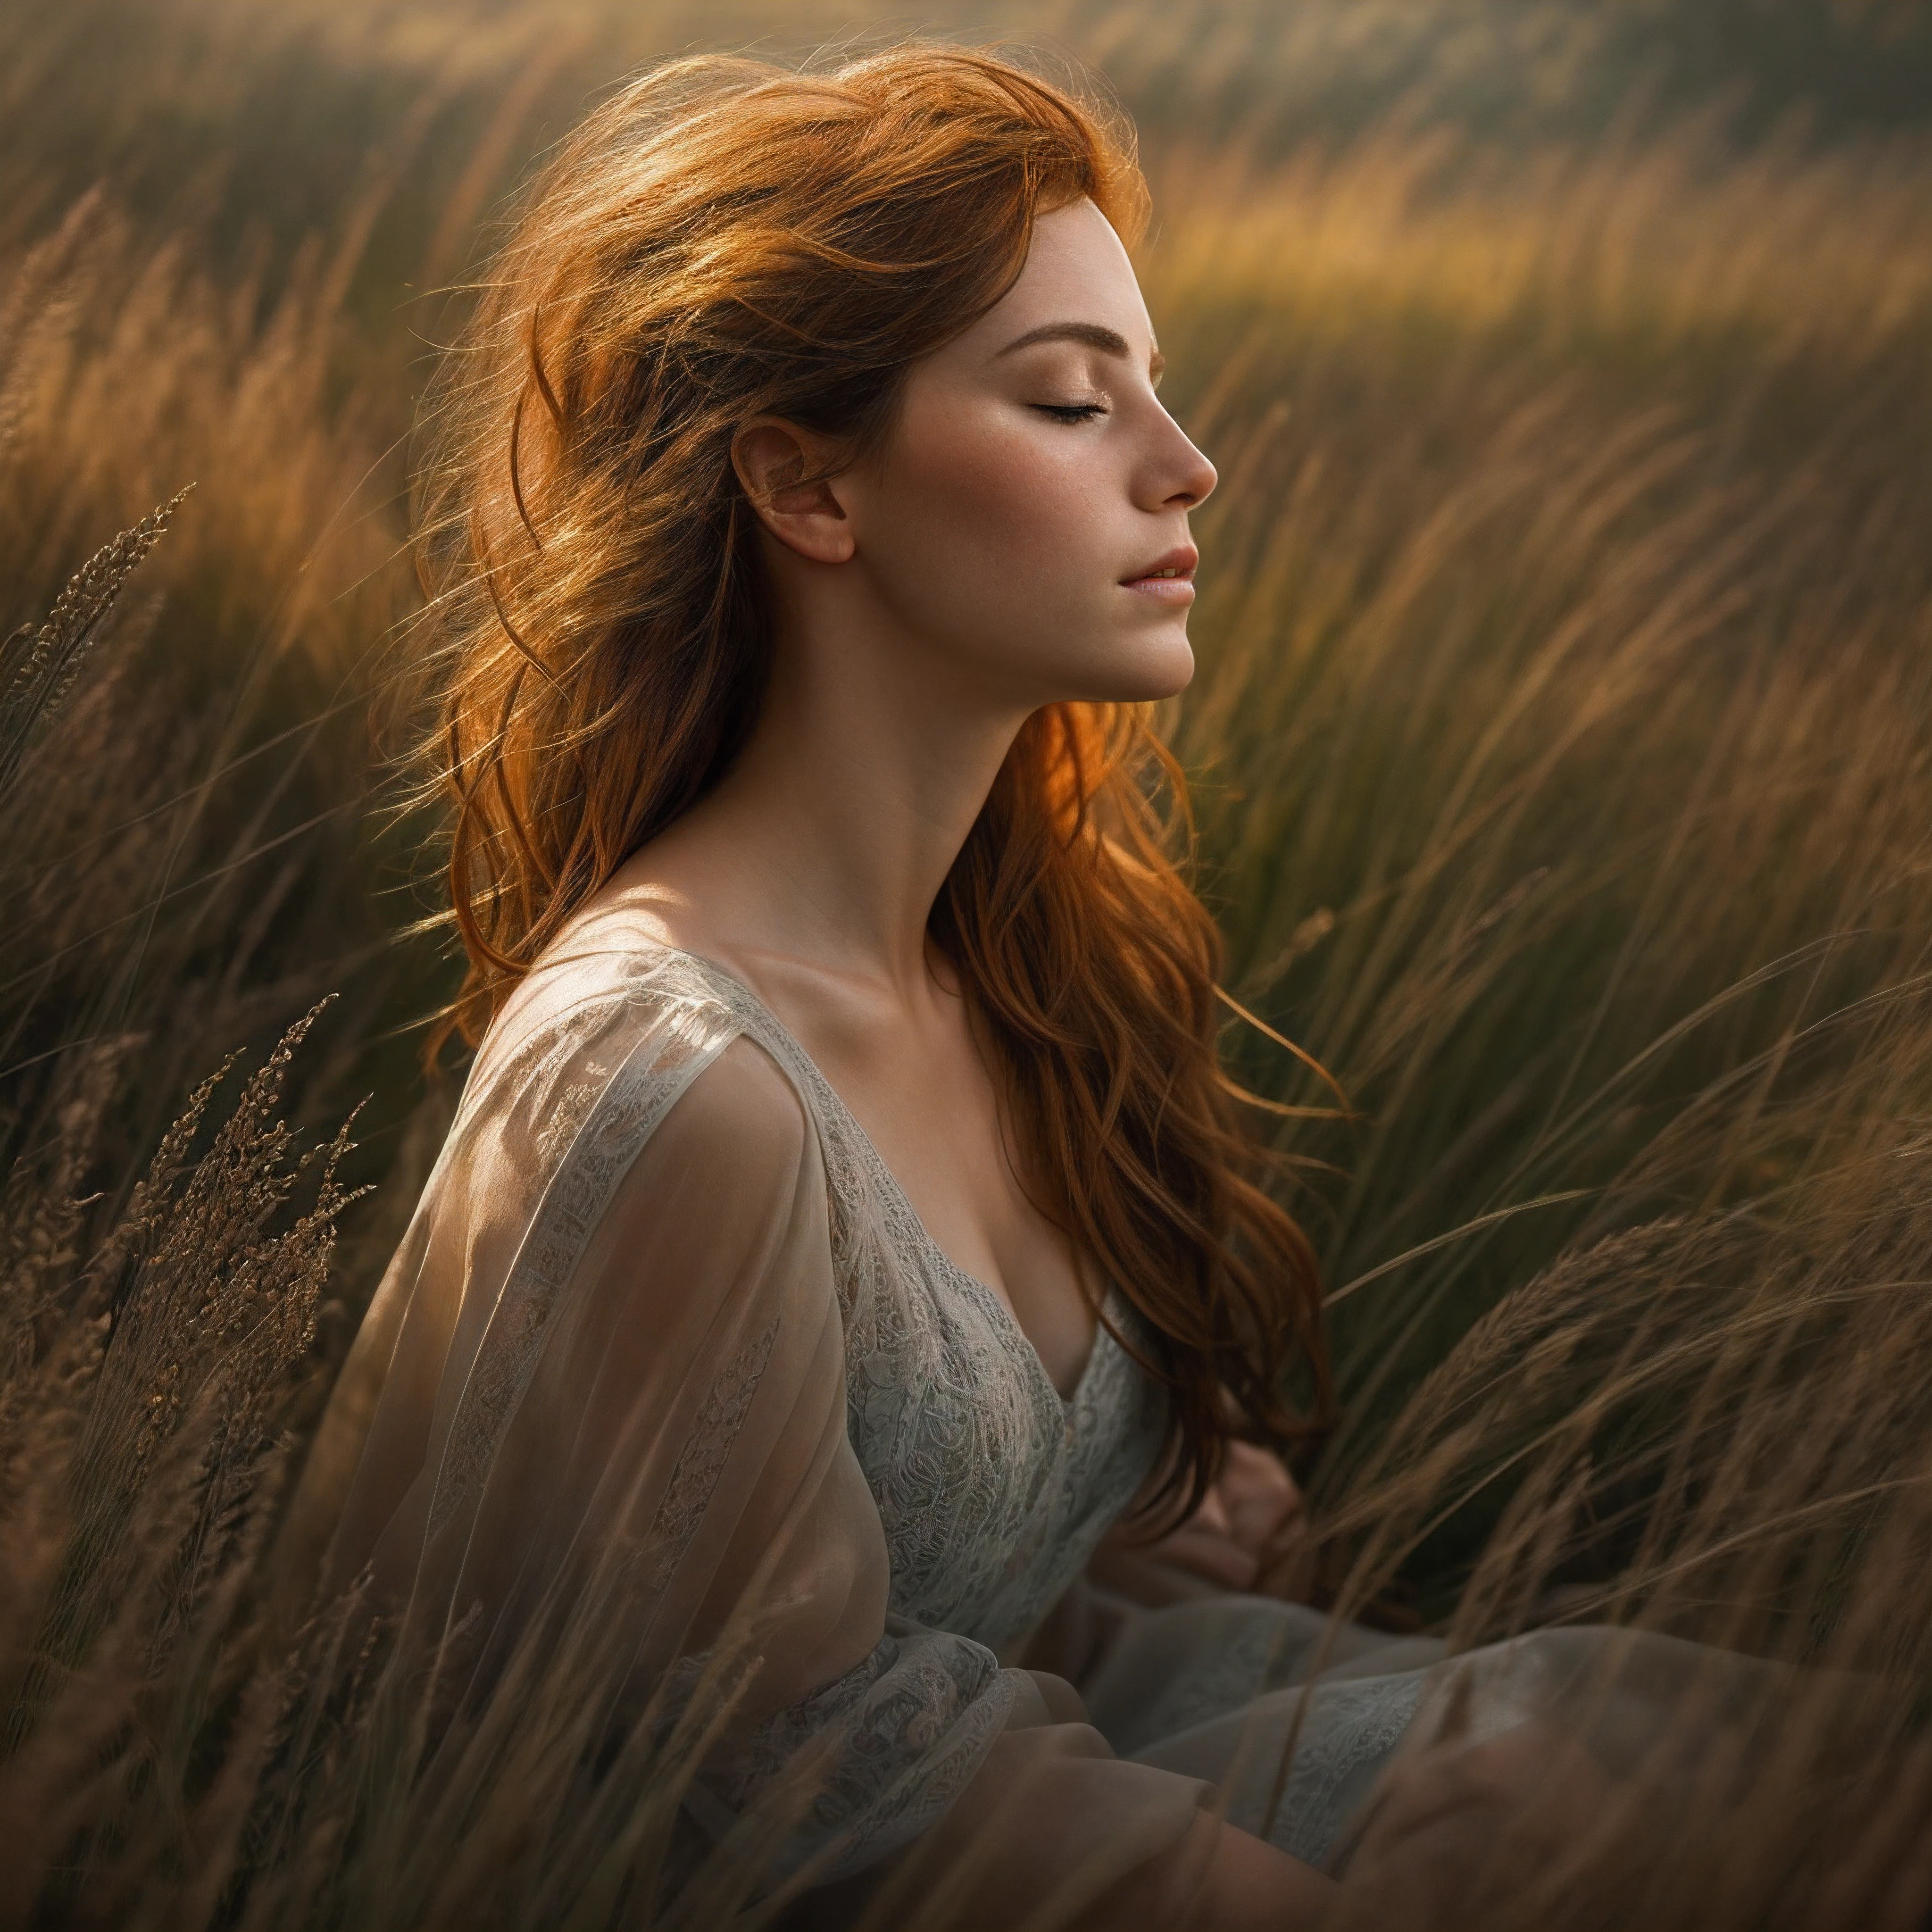 An exquisite portrait depicting a beautiful redheaded woman kneeling peacefully in a lush meadow, eyes closed in pensive thought, delicate features caressed by rays of sunlight, flawless skin adorned with endearing freckles, fiery locks softly blowing in the breeze, masterfully composed in the style of a fine art photographic print, tonality rich and atmospherically moody like a cinematic still, intricate textures and film grain integrated seamlessly, overall craftsmanship superbly executed with extraordinary attention to detail, this profound digital painting epitomizes photorealism meets imaginative artistry.